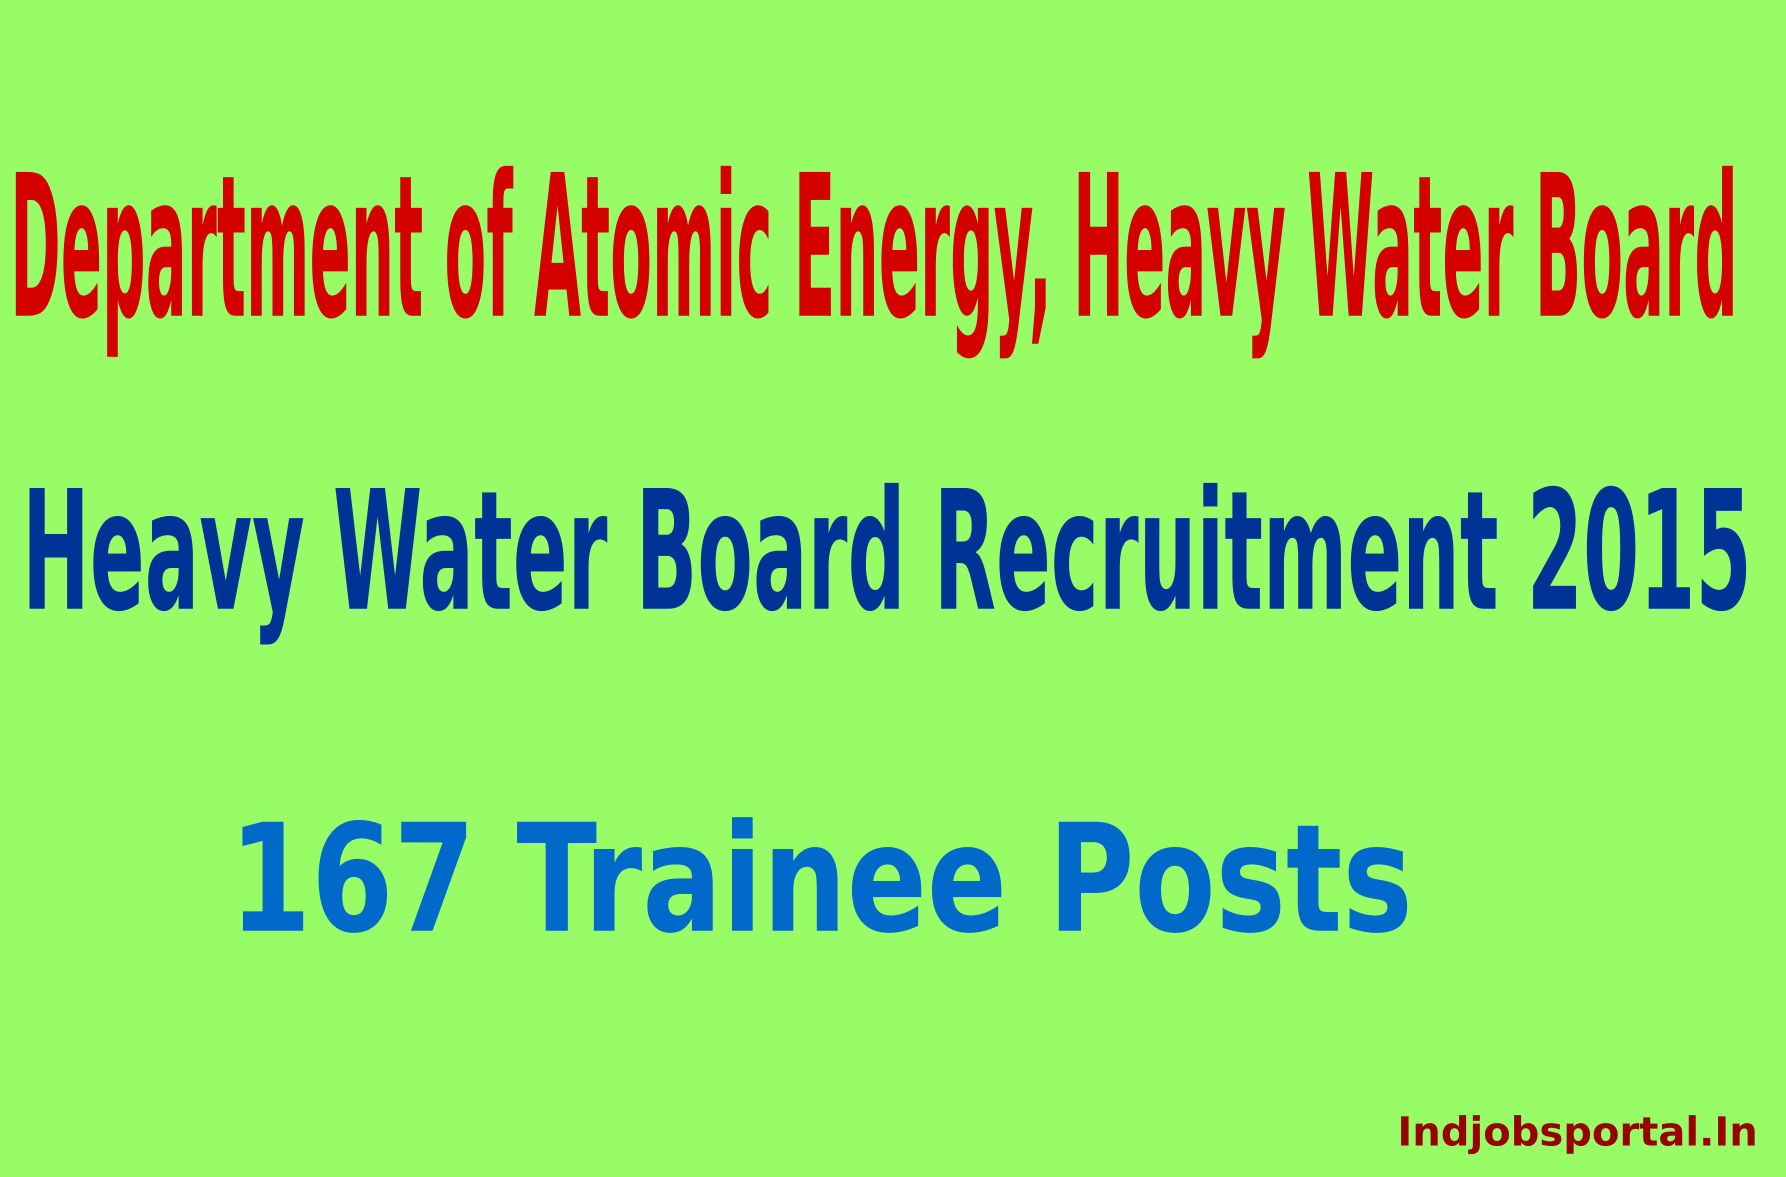 Heavy Water Board Recruitment 2015 Apply Online For 167 Trainee Posts